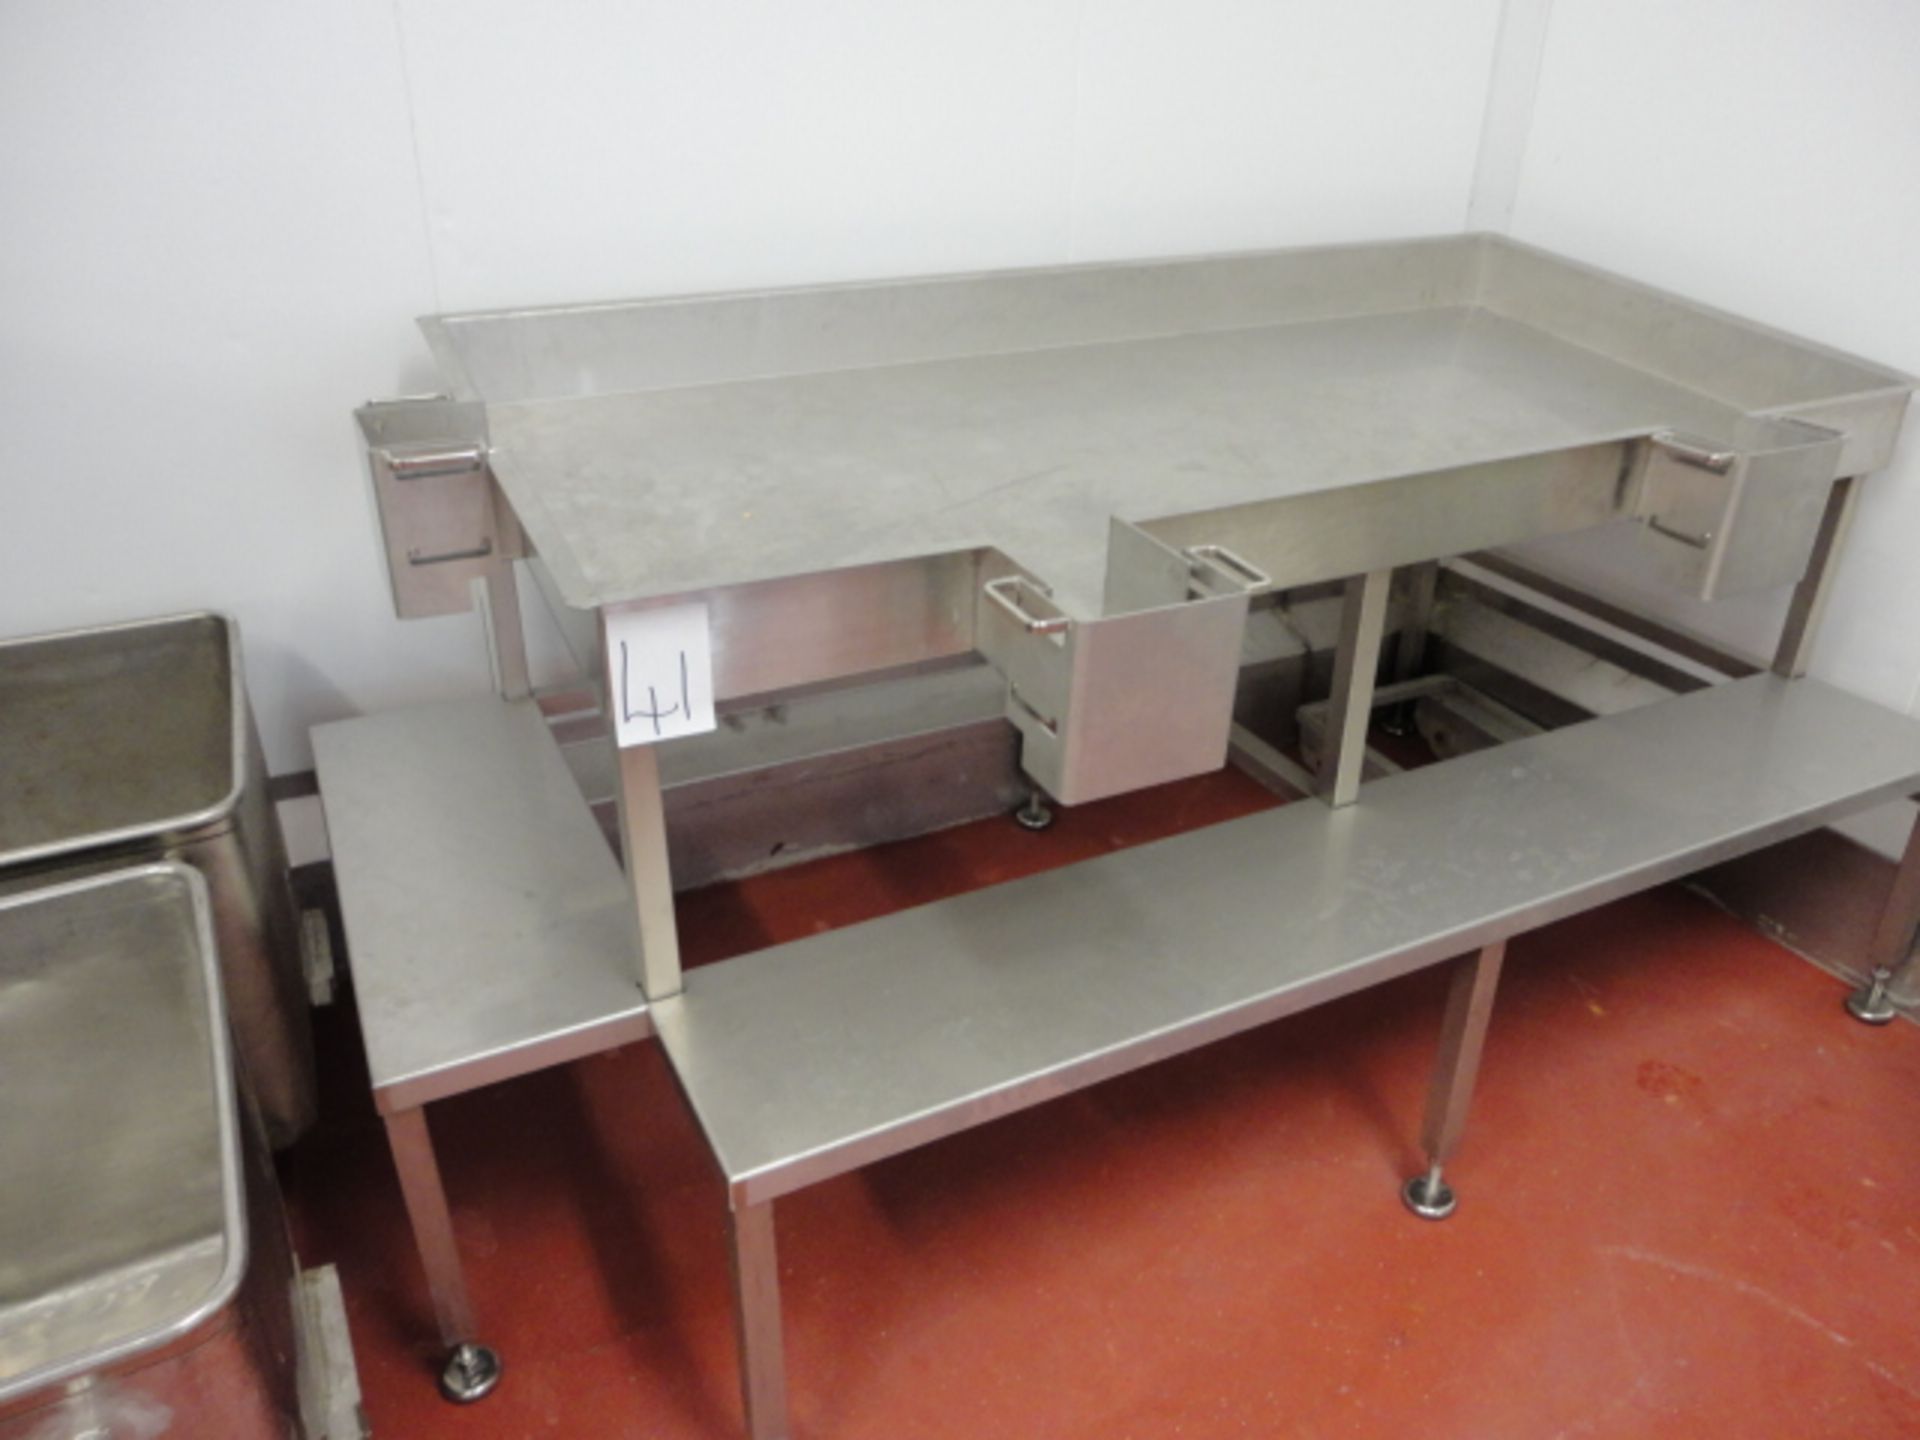 1 X S/S WORKSTATION AND PACKING STATION 3 BAG HOLDERS 2 MTR X 2.3MTR LIFT OUT £10